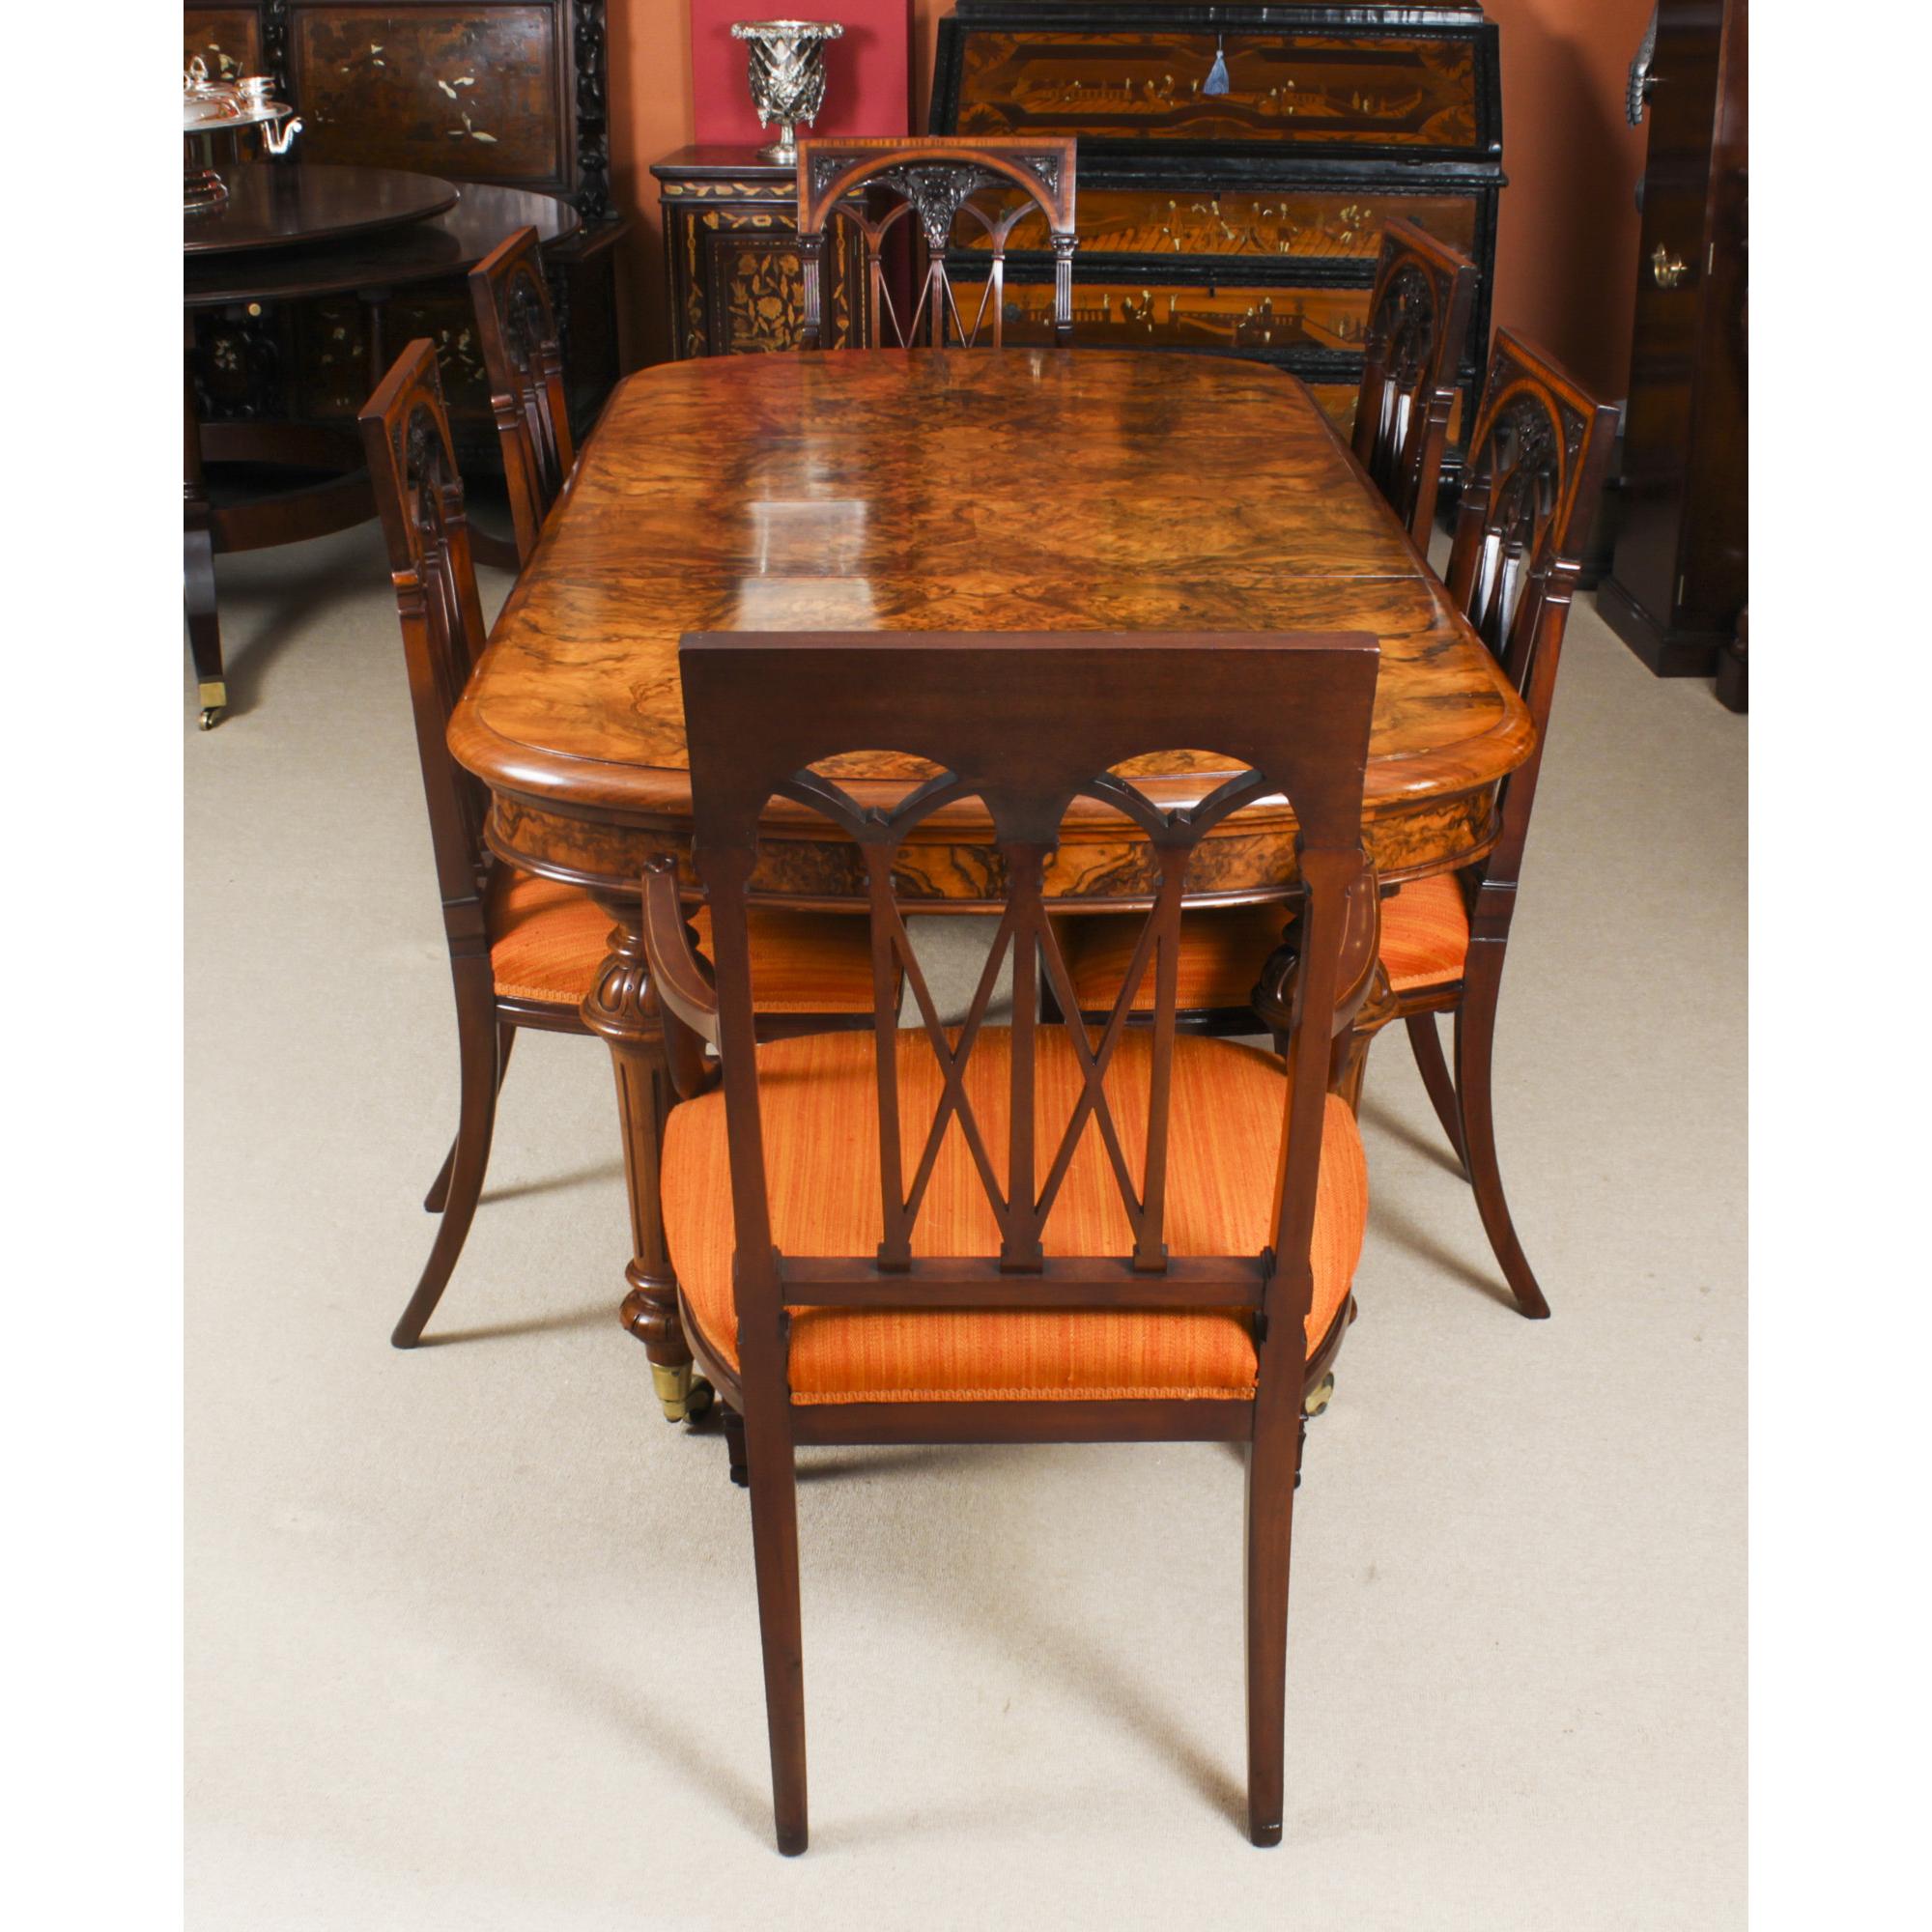 This is a magnificent dining set comprising a rare petite antique Victorian burr walnut extending dining table, C1870 in date with an antique set of six dining chairs, C1900 in date.

The table has been hand crafted from burr walnut and has two